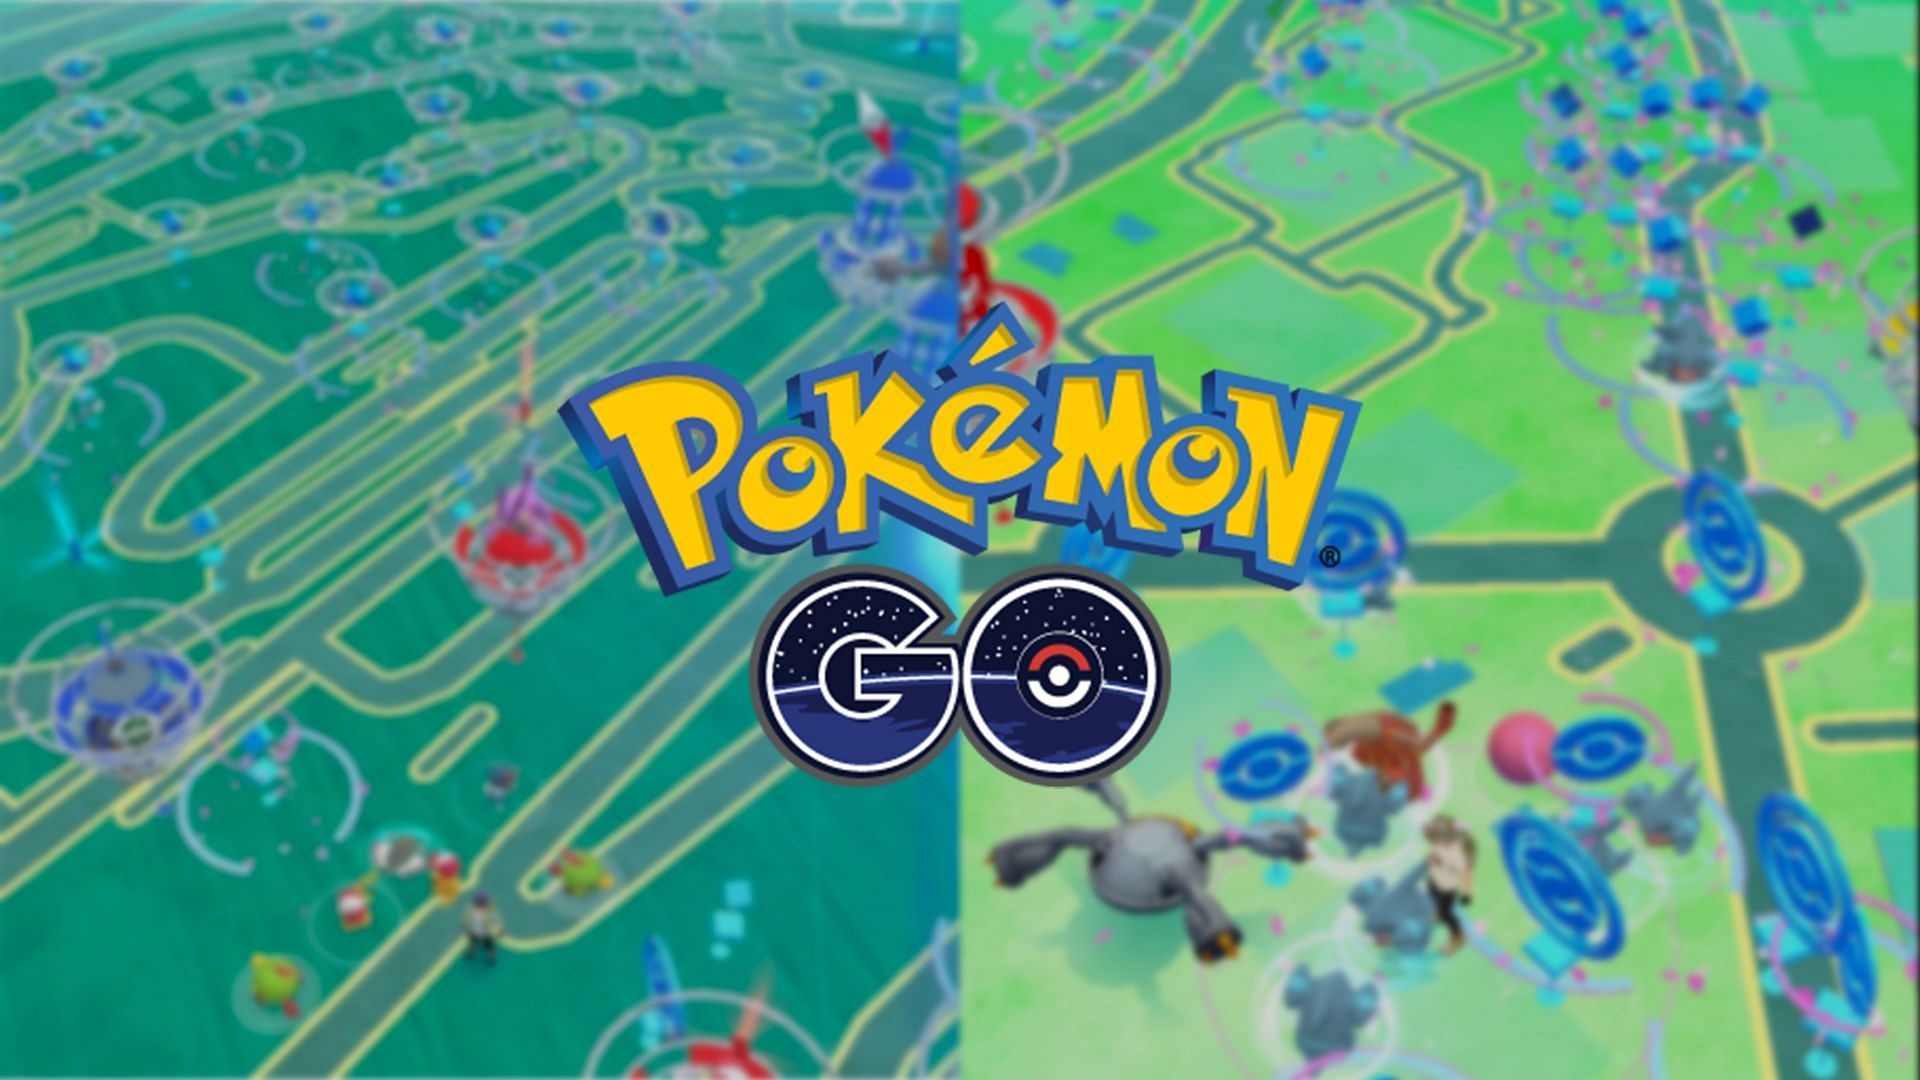 Pokemon GO Nests in the platform for Pocket Monsters to spawn (Image via Niantic)